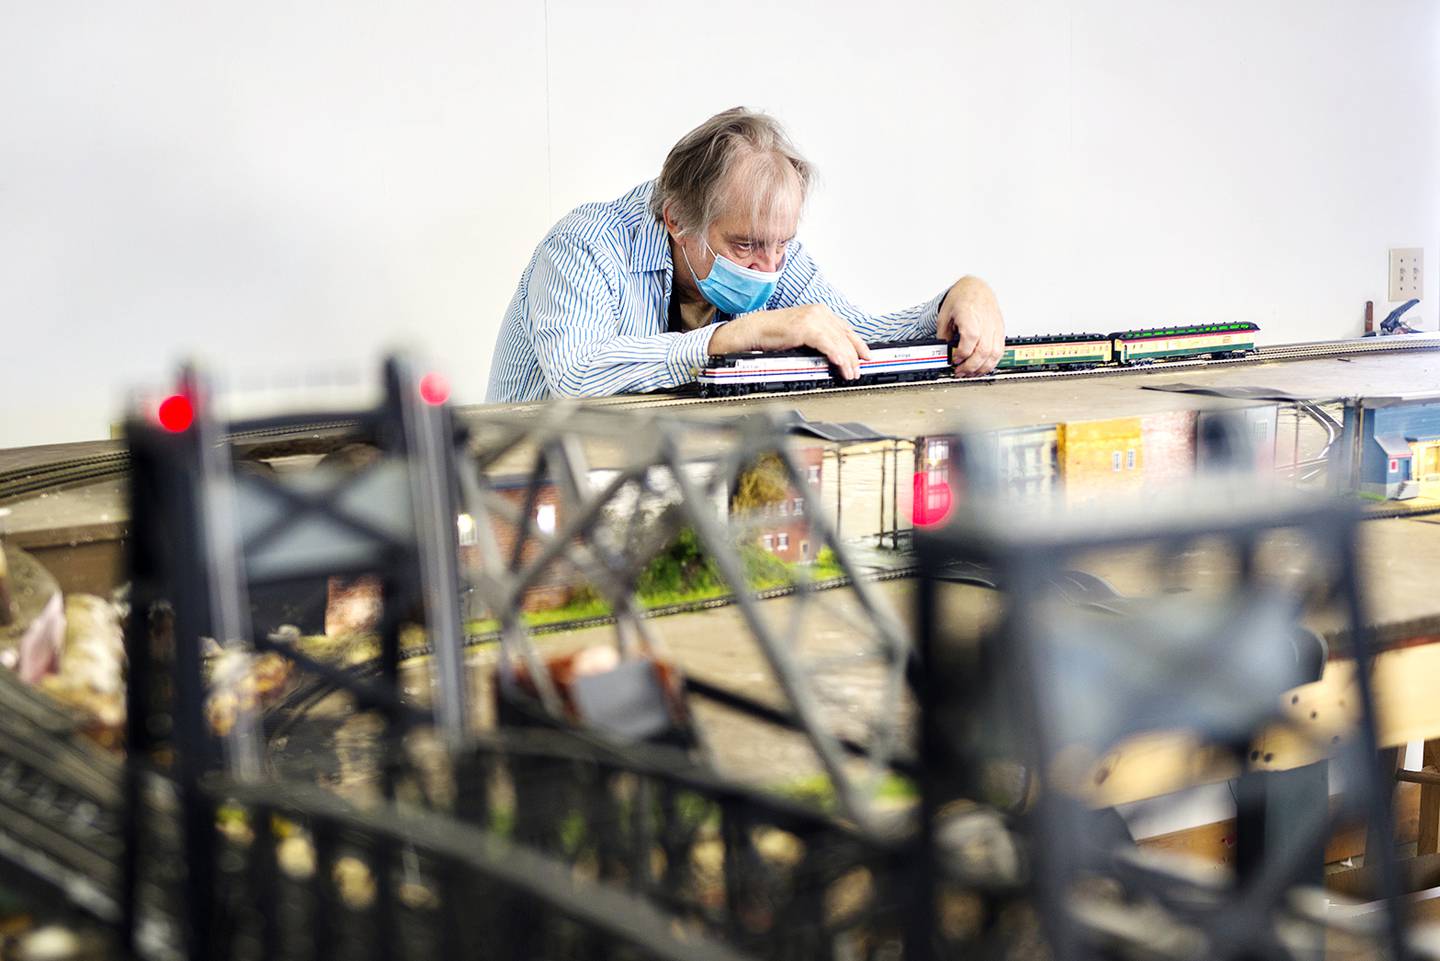 John Urbaniak of Sterling sets the train on the track at the Northwest Illinois Model Railroad Club in Chadwick.  "Things can run great for 10-12 times then just like that it jumps the track."